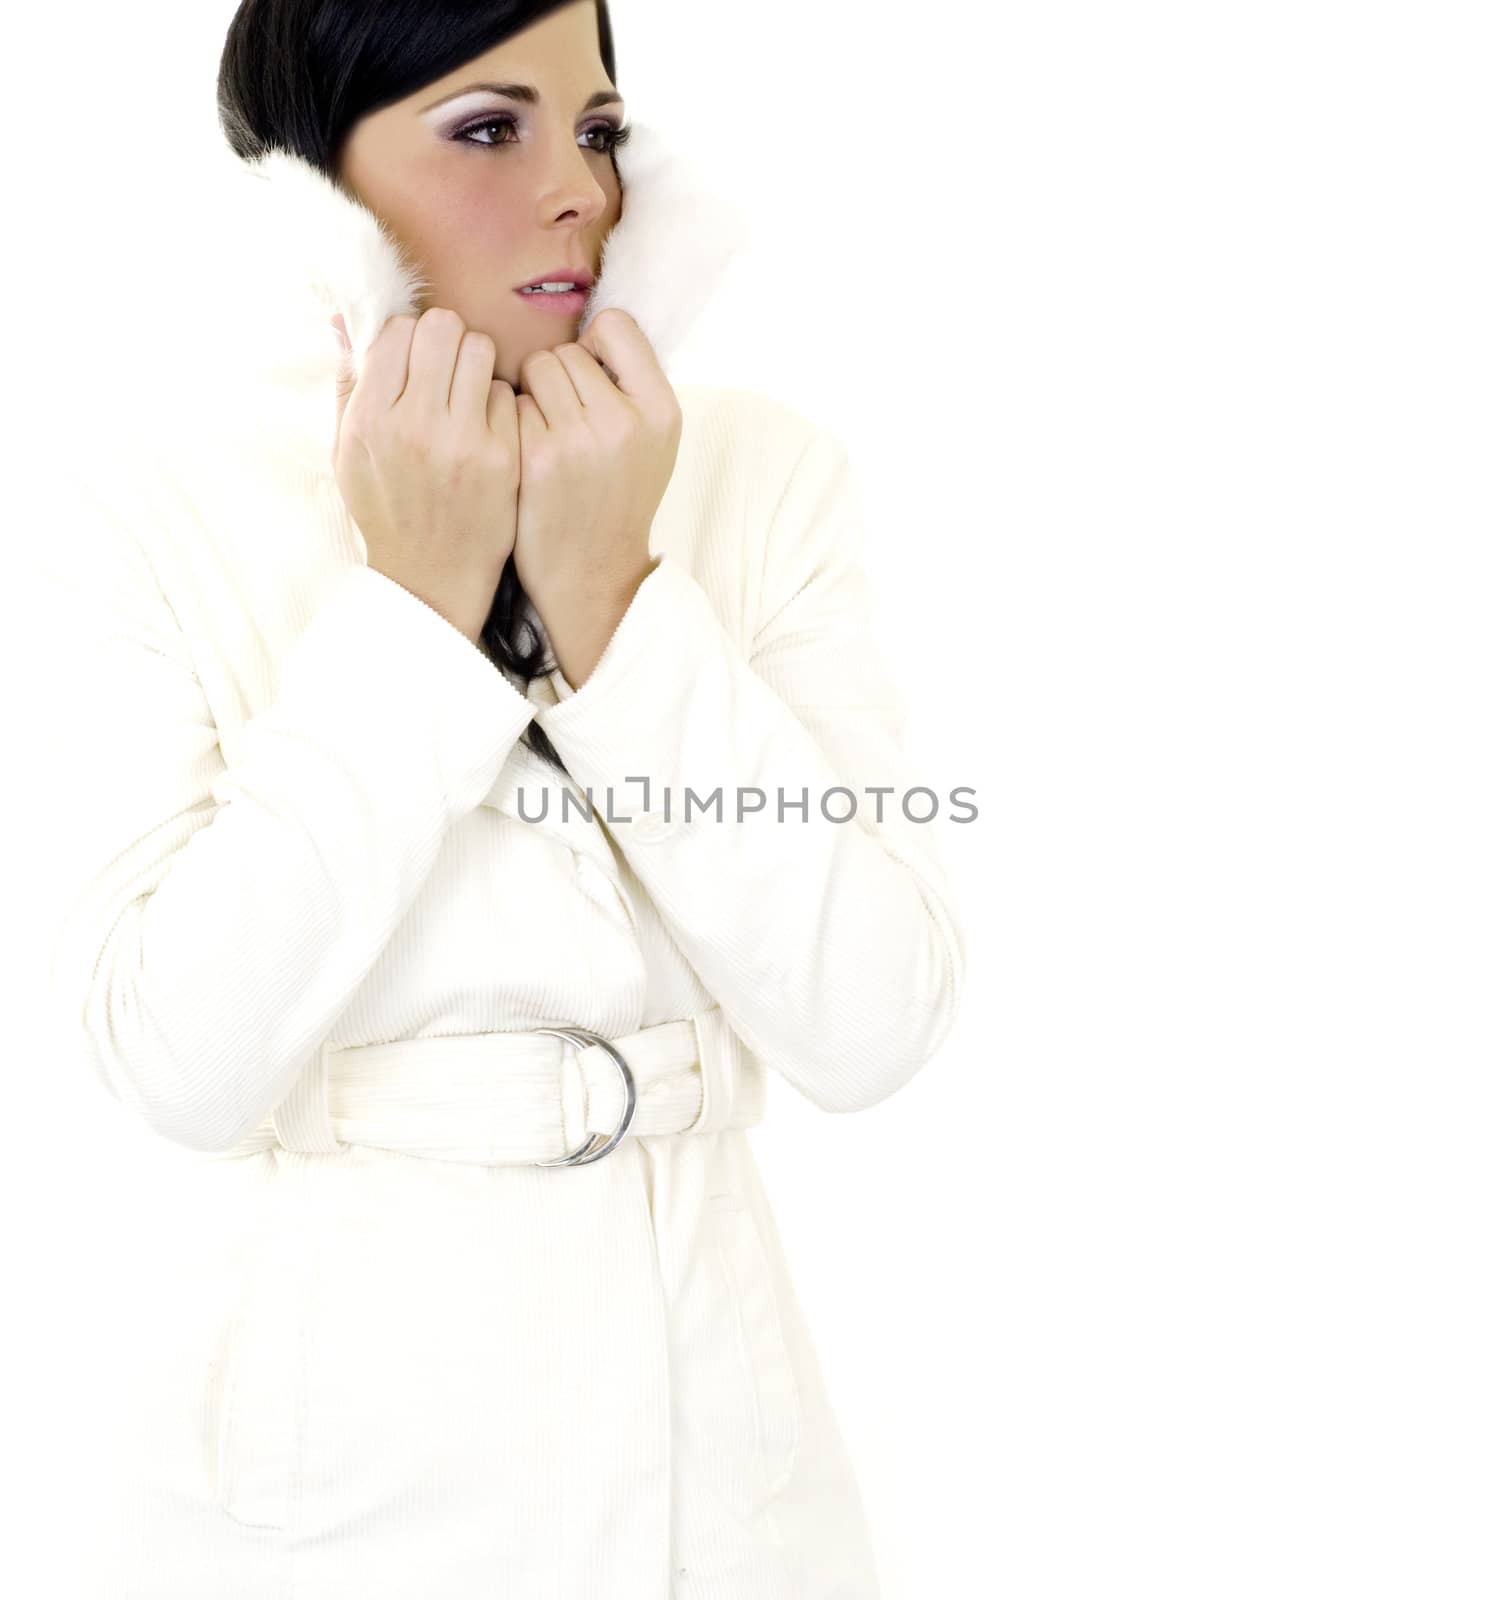 A beautiful model on an isolated white background. Looking at body copy on the right.